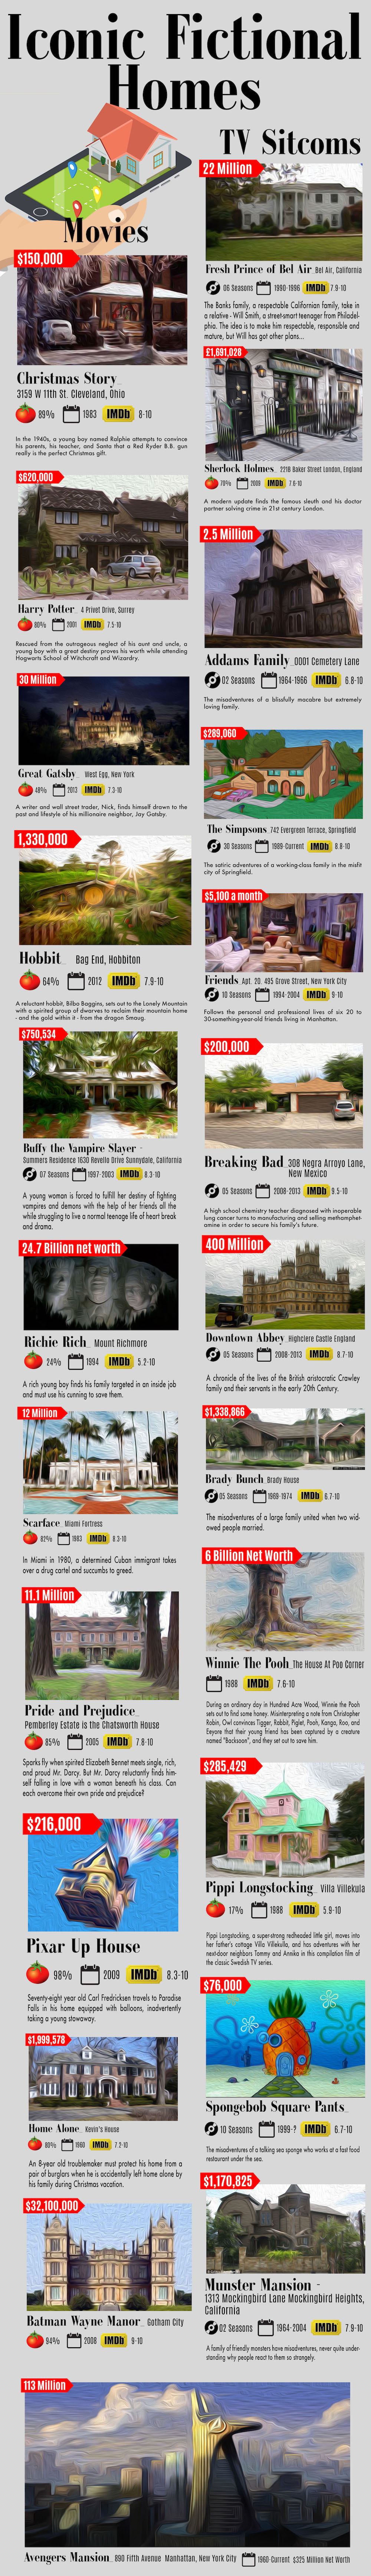 Infographic - Iconic Fictional Homes From The Movies and Television Sitcoms